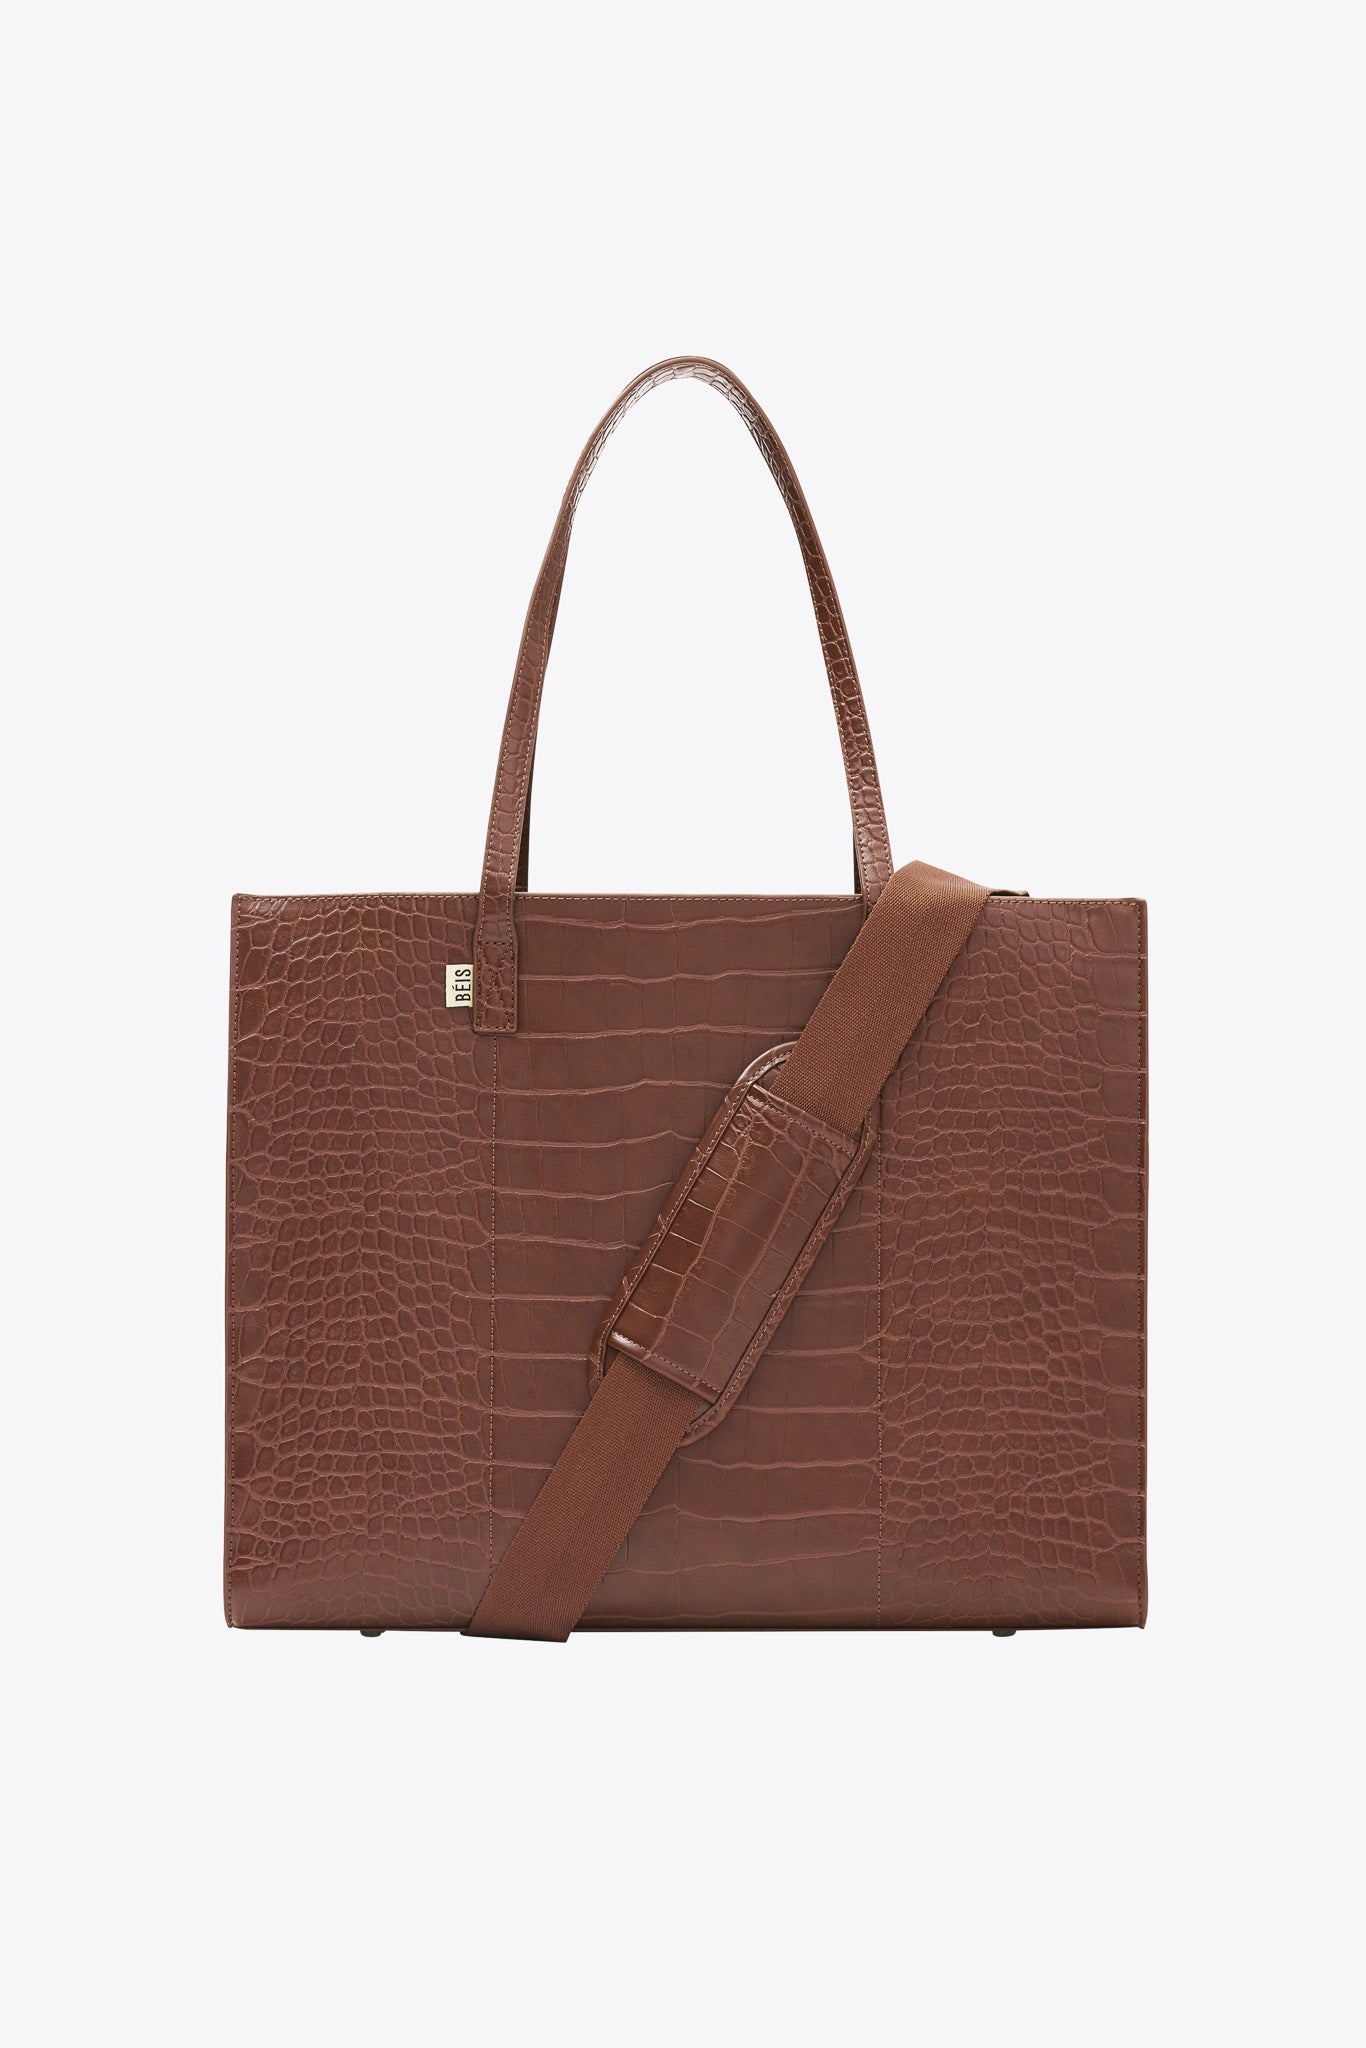 The Large Work Tote in Maple Croc